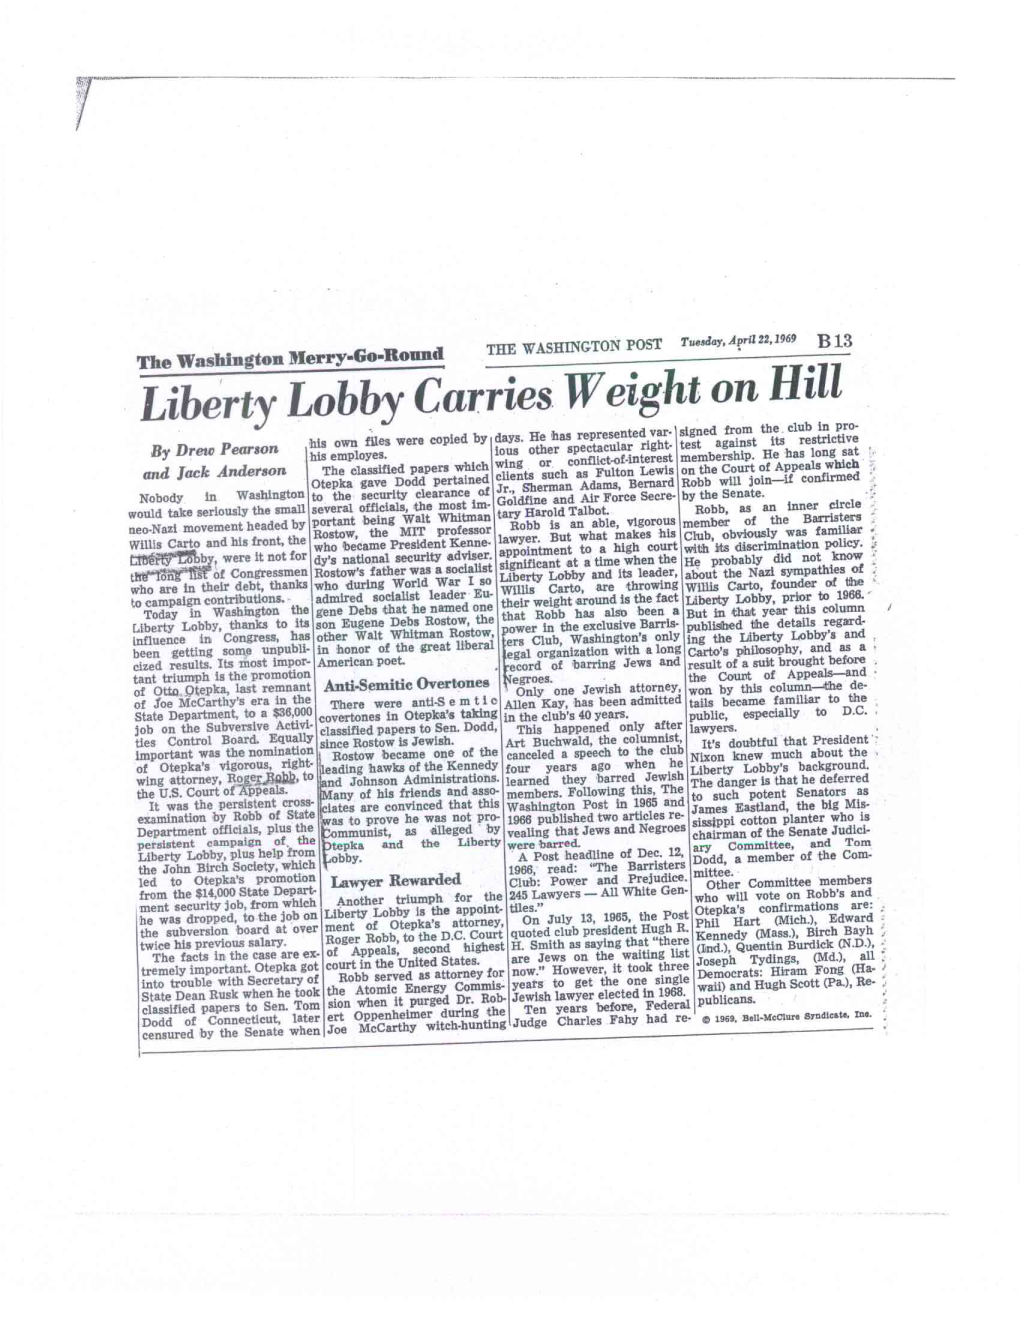 Liberty Lobby Carries Weight on Hill Signed from the Club in Pro- His Own Files Were Copied by Days